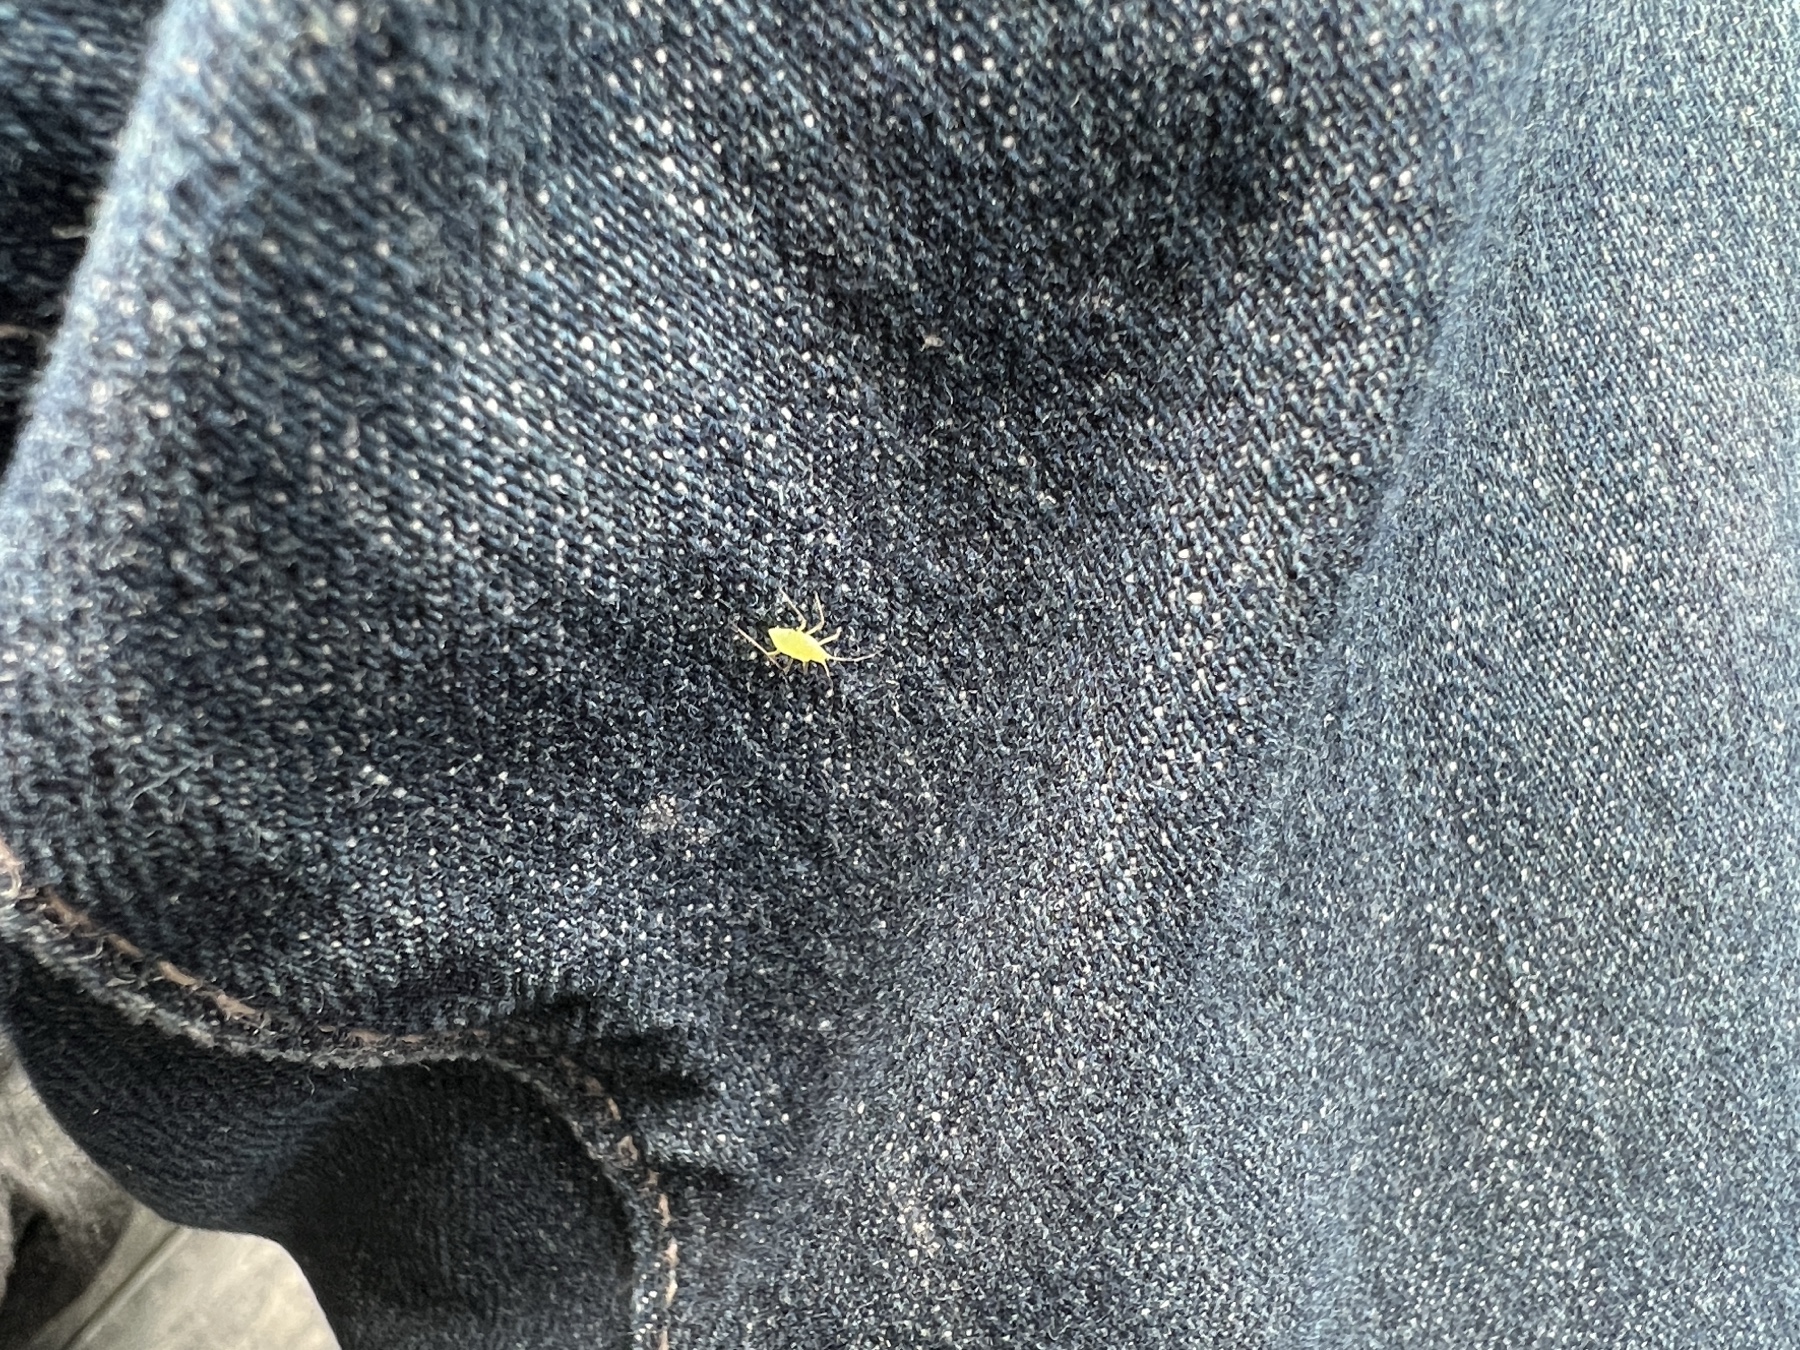 small, green insect on blue denim pant leg